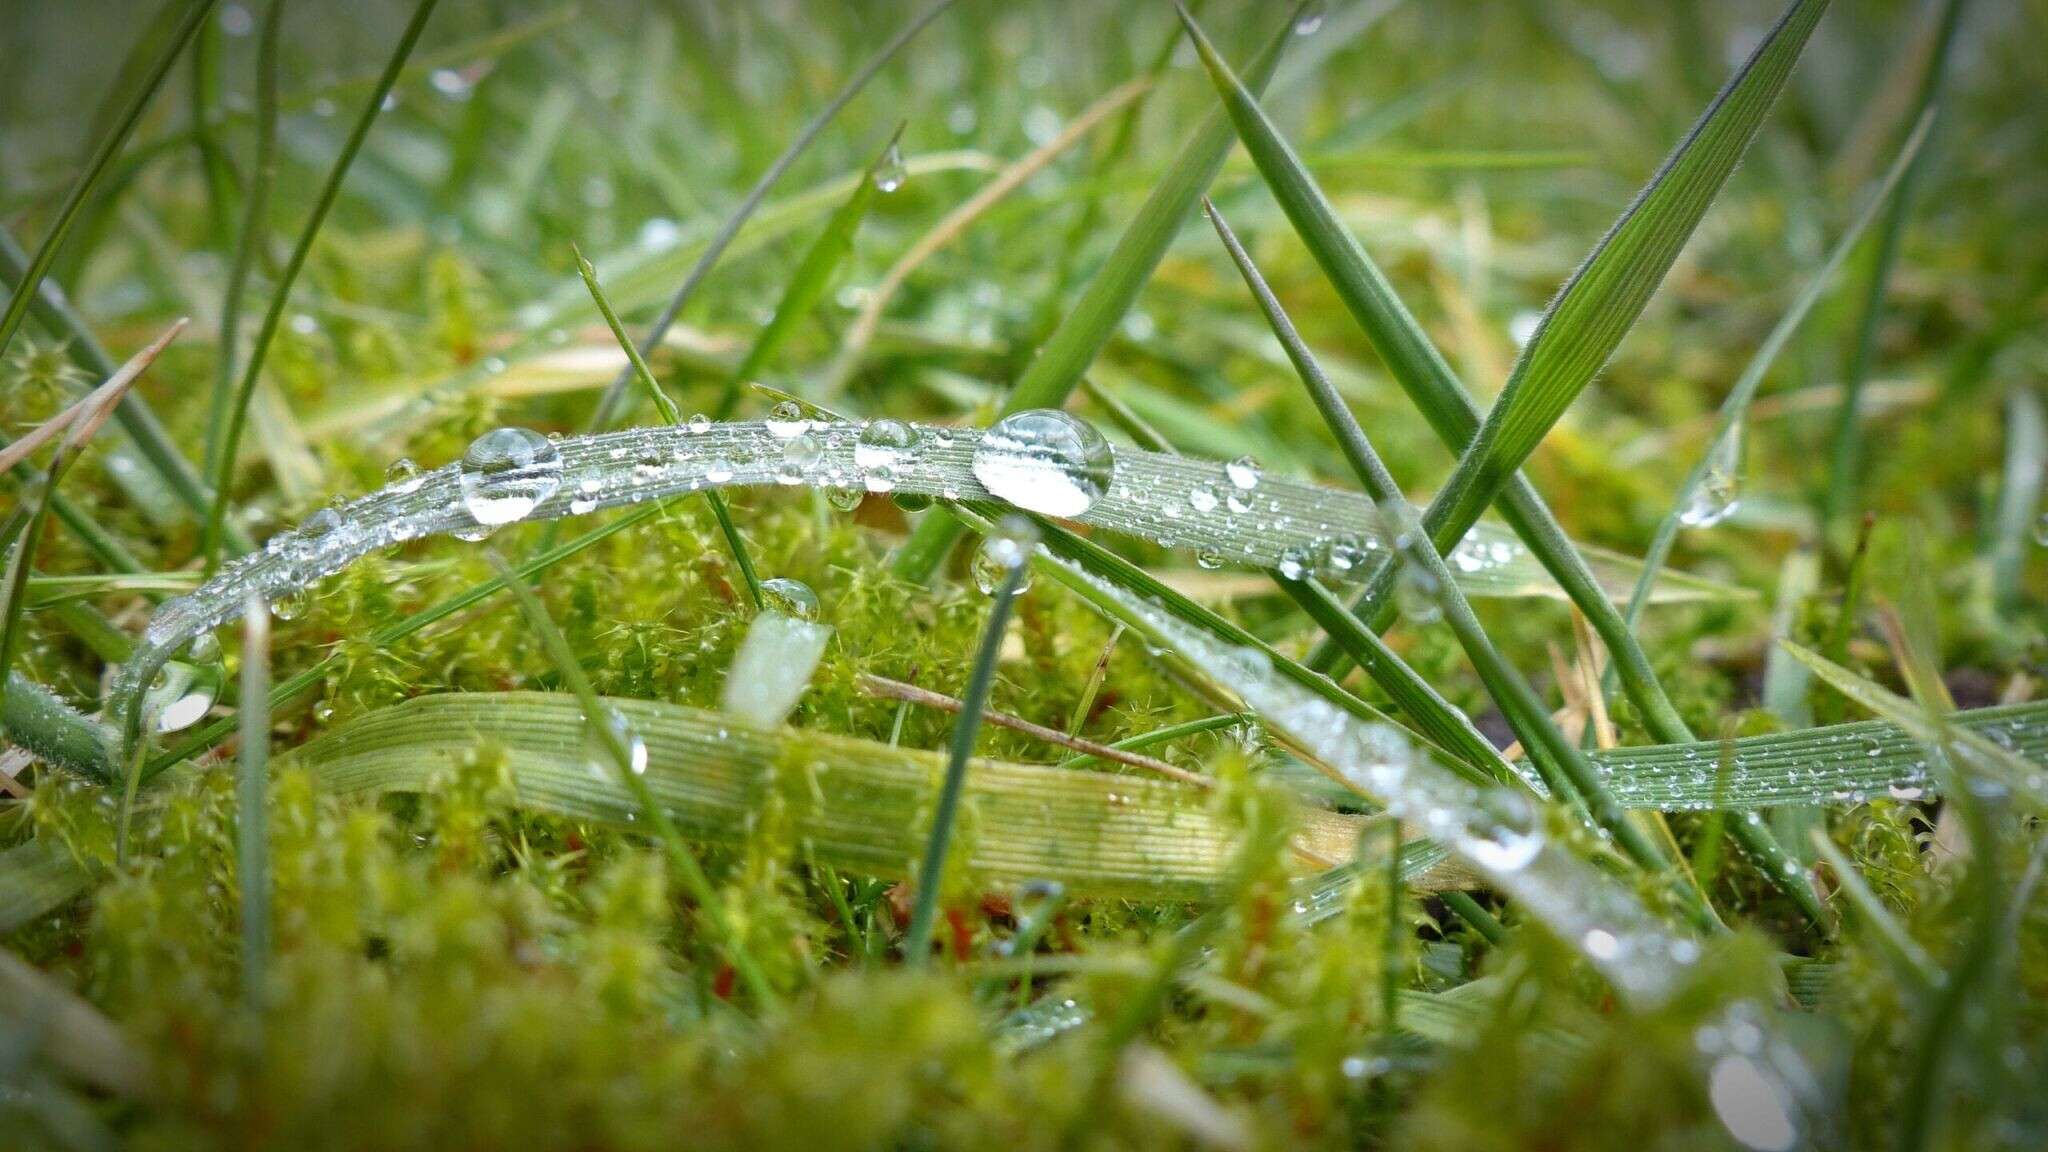 Drops of morning dew on Grass, macro image in Nature and Landscapes category at pixy.org